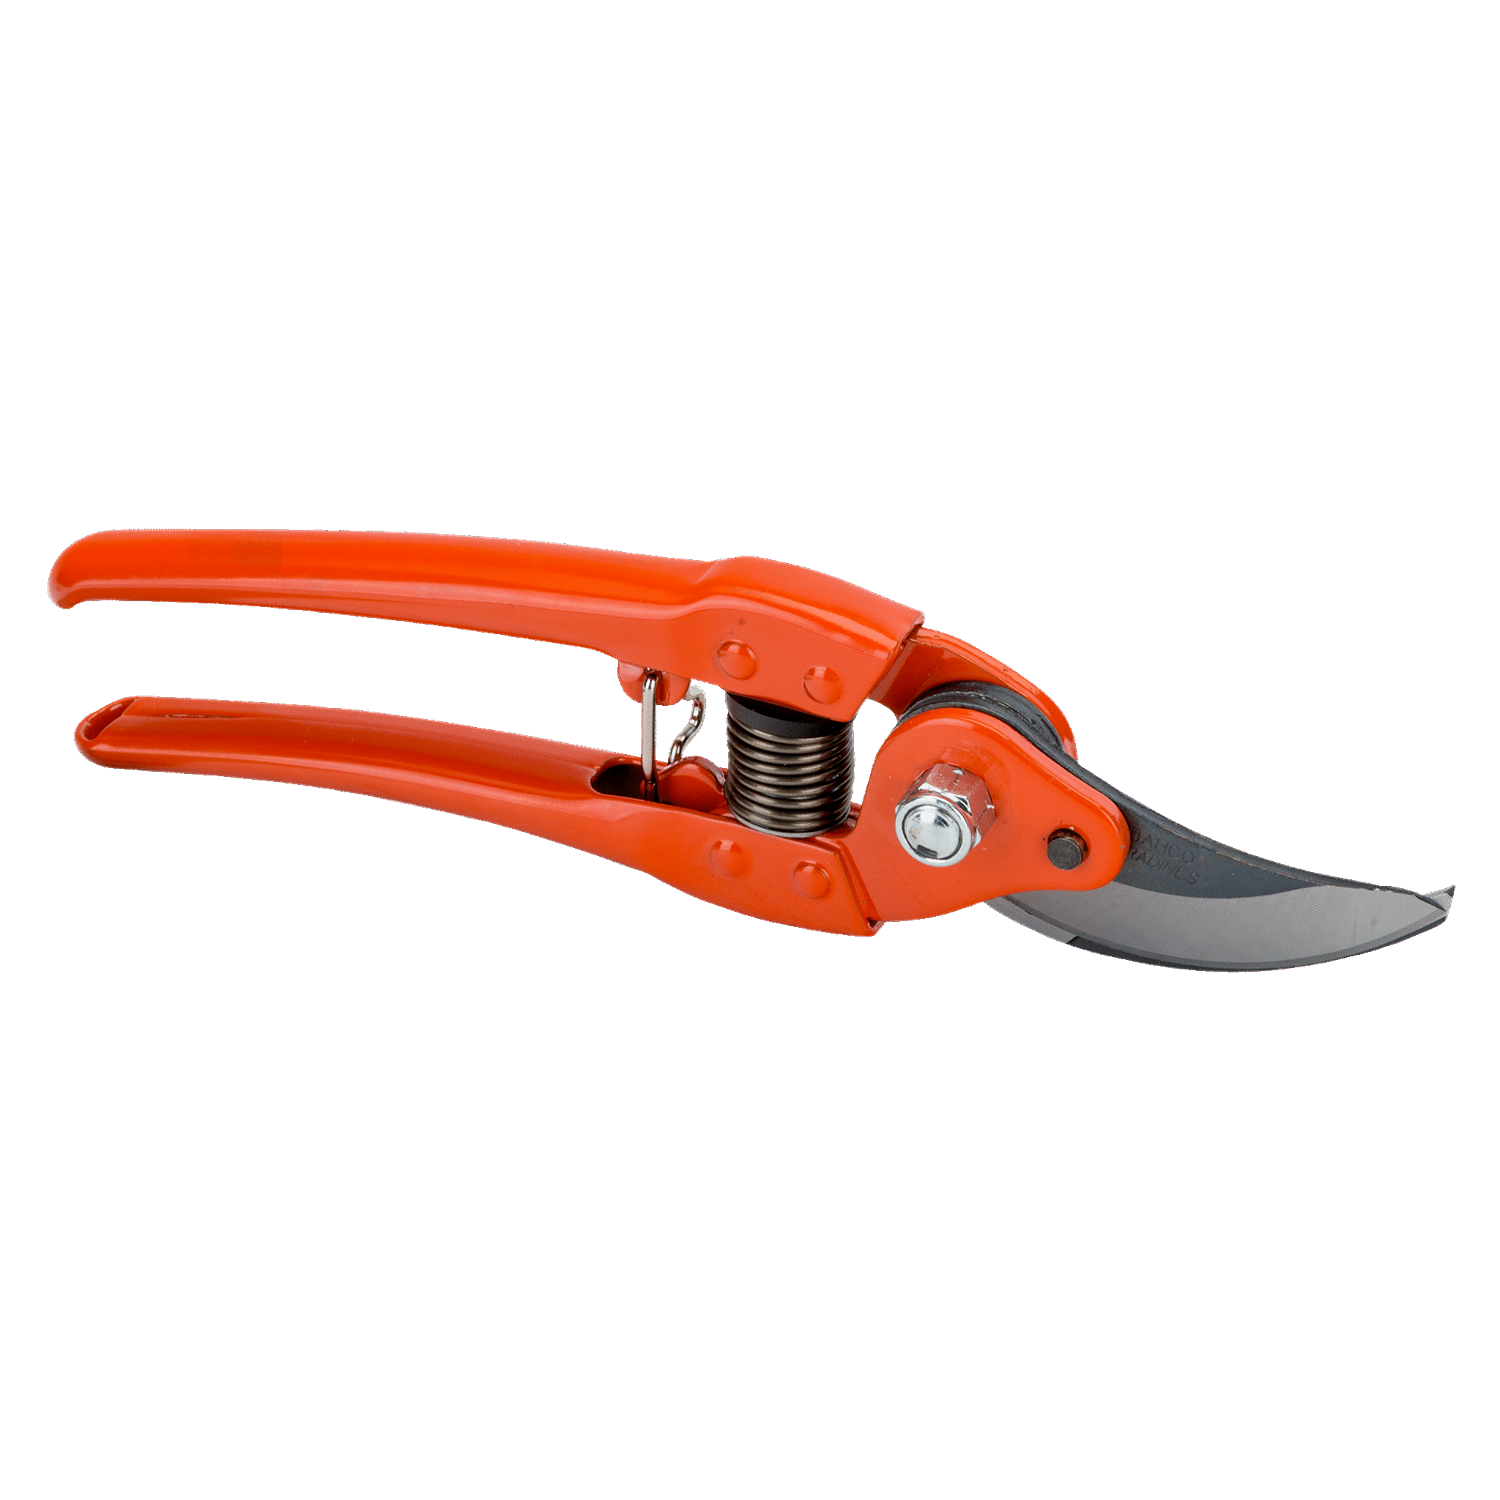 BAHCO P110-20-F/P110-23-F Bypass Secateurs, Pressed Steel Handle - Premium Secateurs from BAHCO - Shop now at Yew Aik.